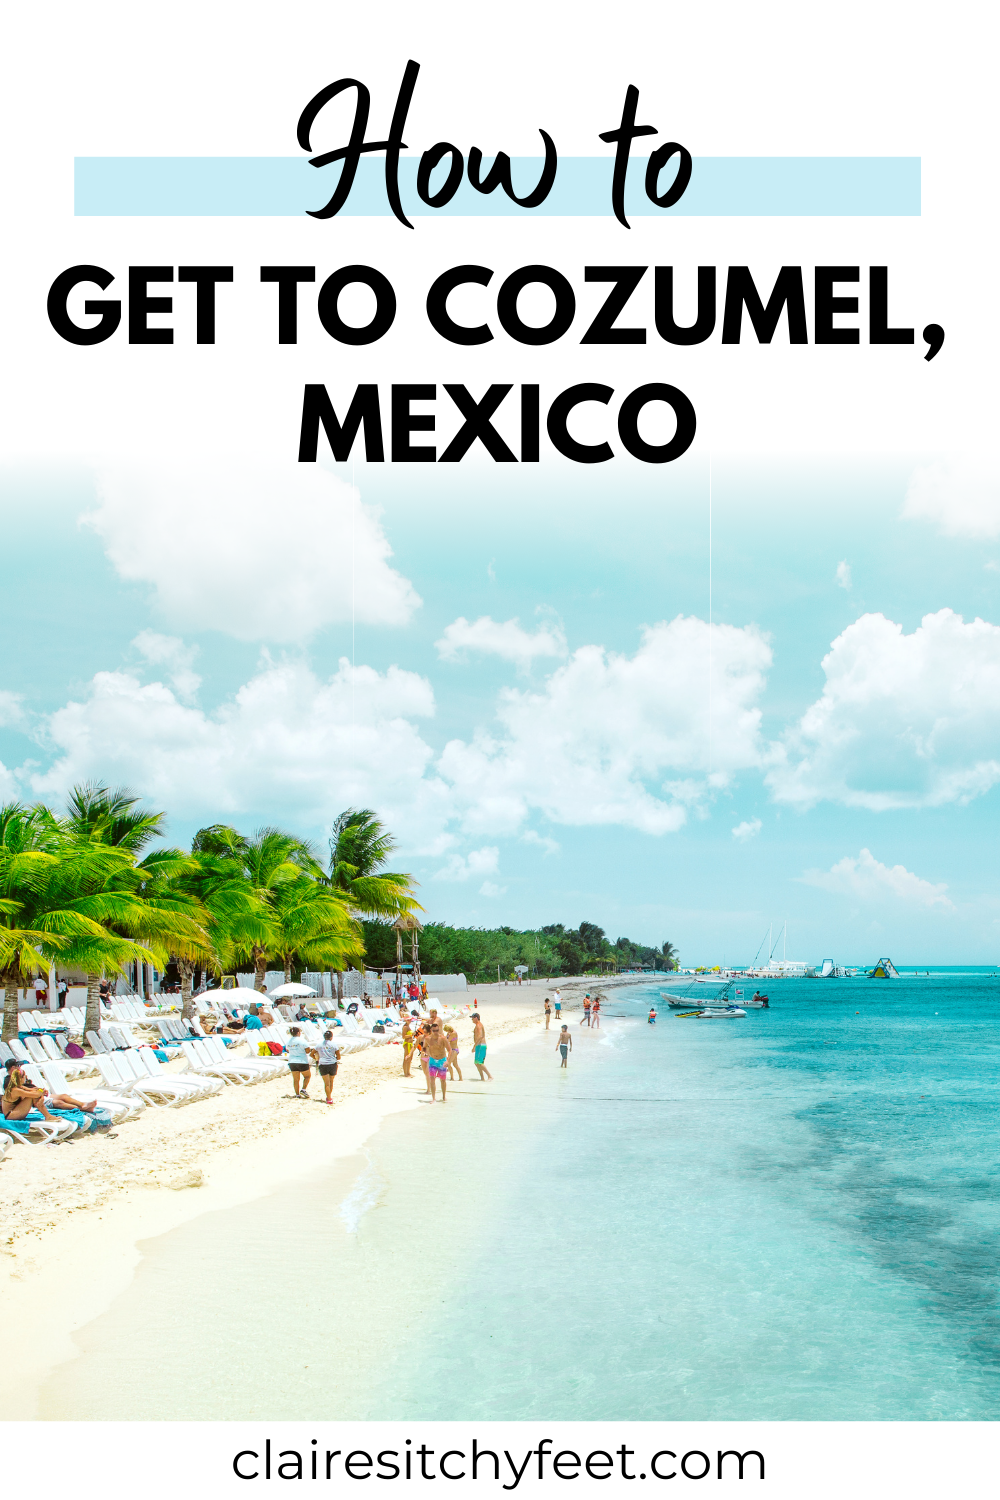 How To Get To Cozumel - Cancun To Cozumel